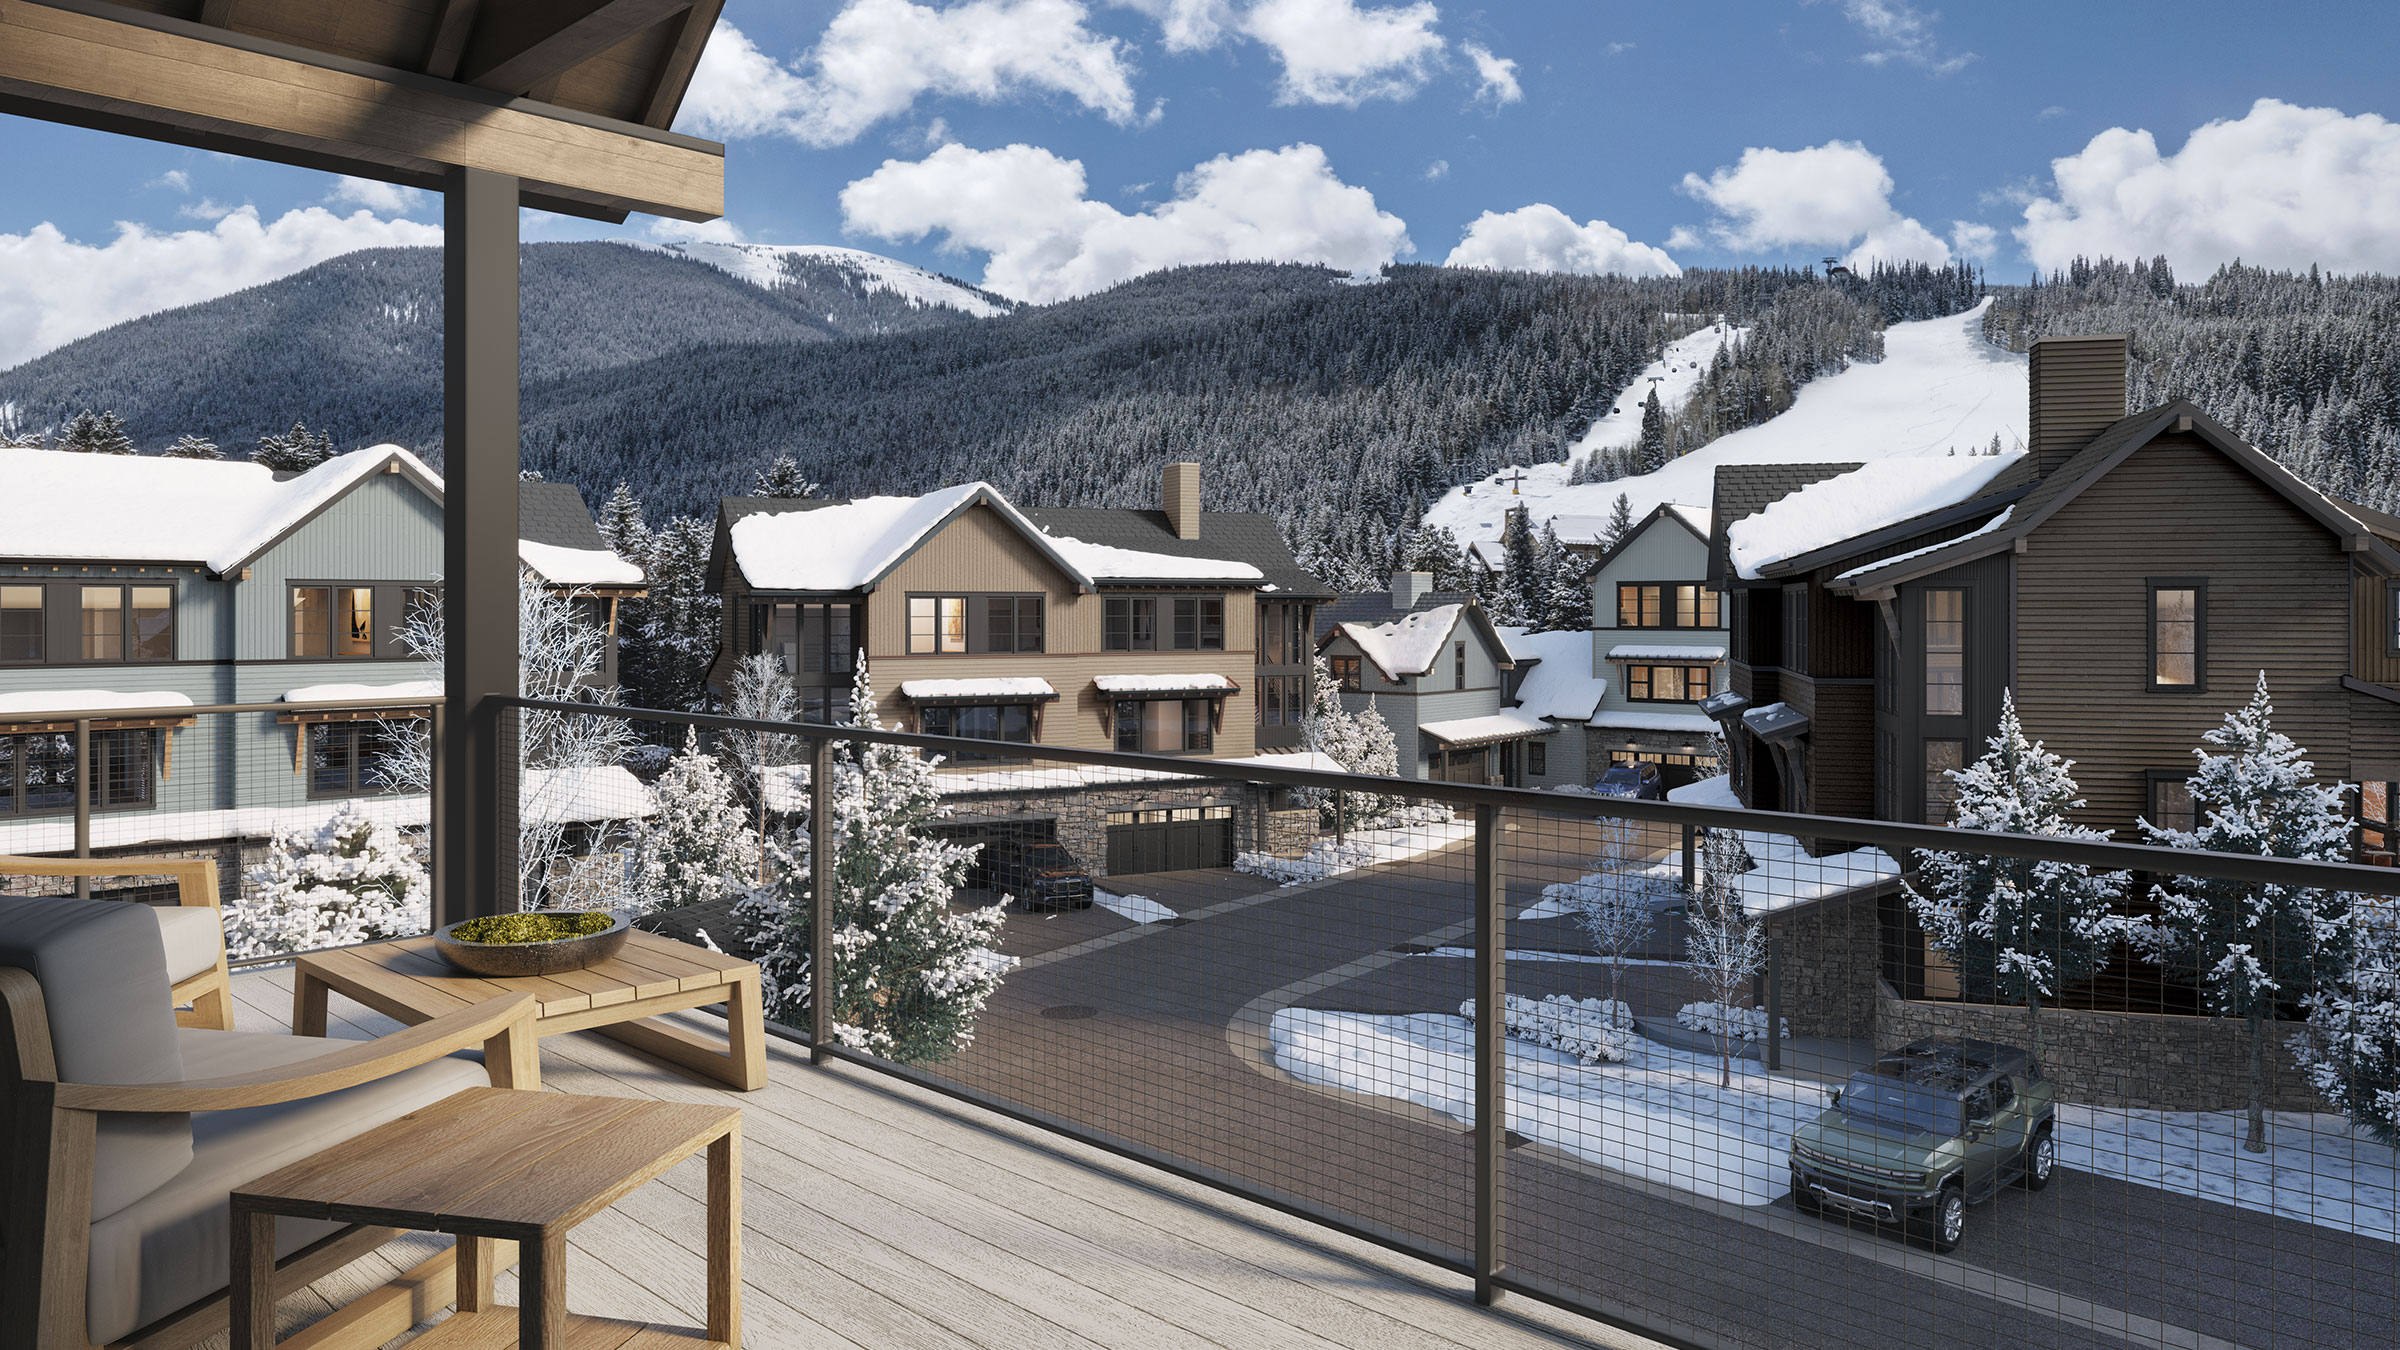 All Alcove residences have stunning mountain and ski run views.